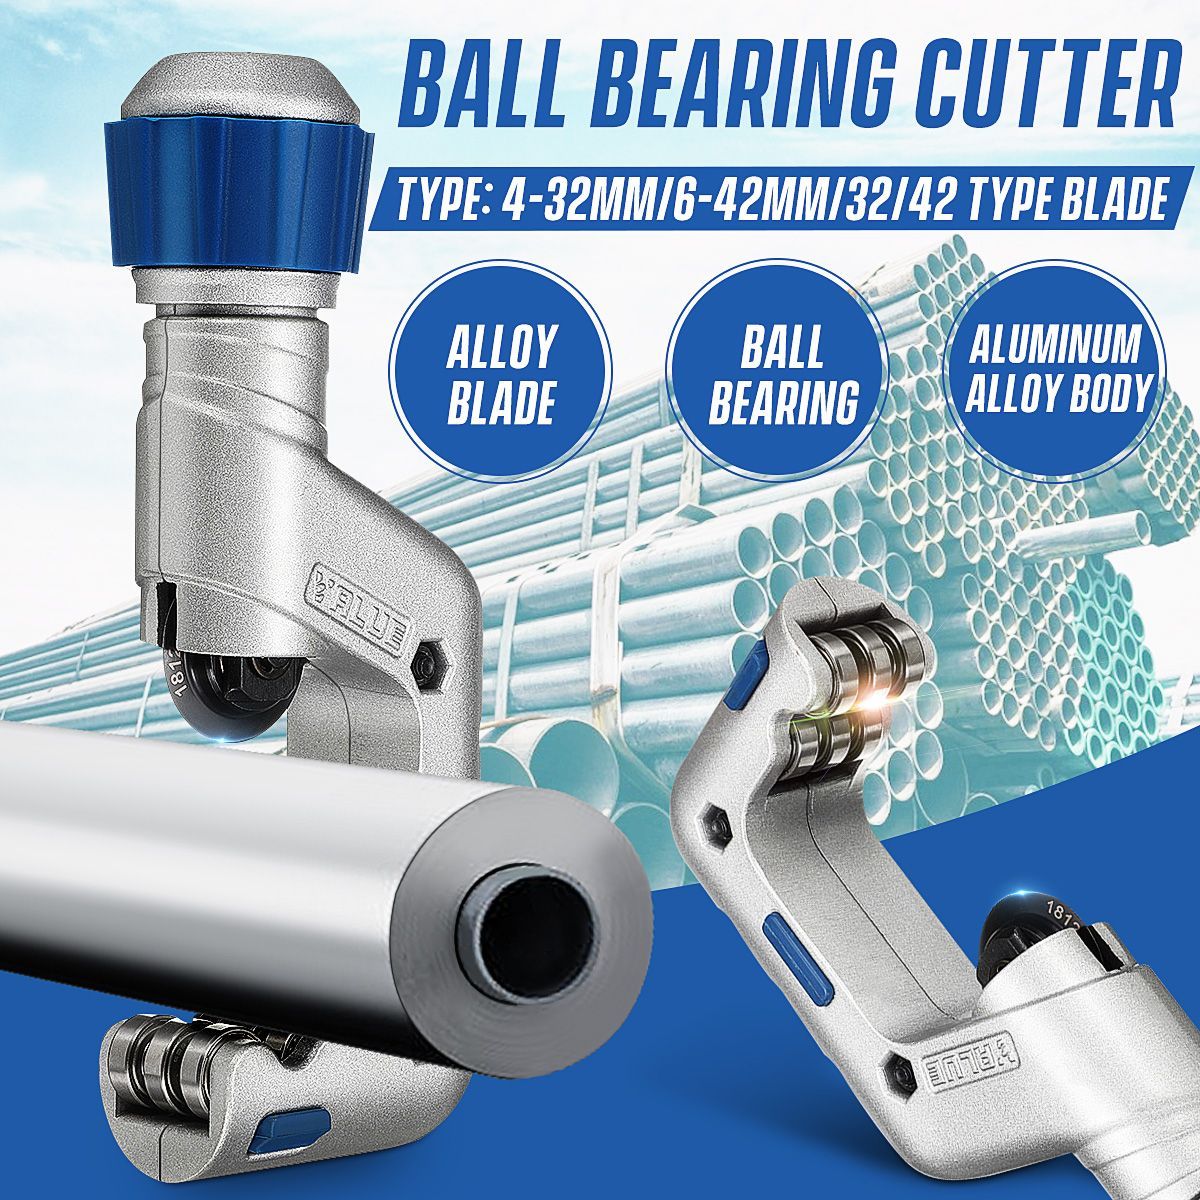 Roller-Tube-Cutter-4-32mm6-42mm-Pipe-Cutter-Ball-Bearing-Cutting-Blade-For-Copper-Aluminum-Stainless-1617909